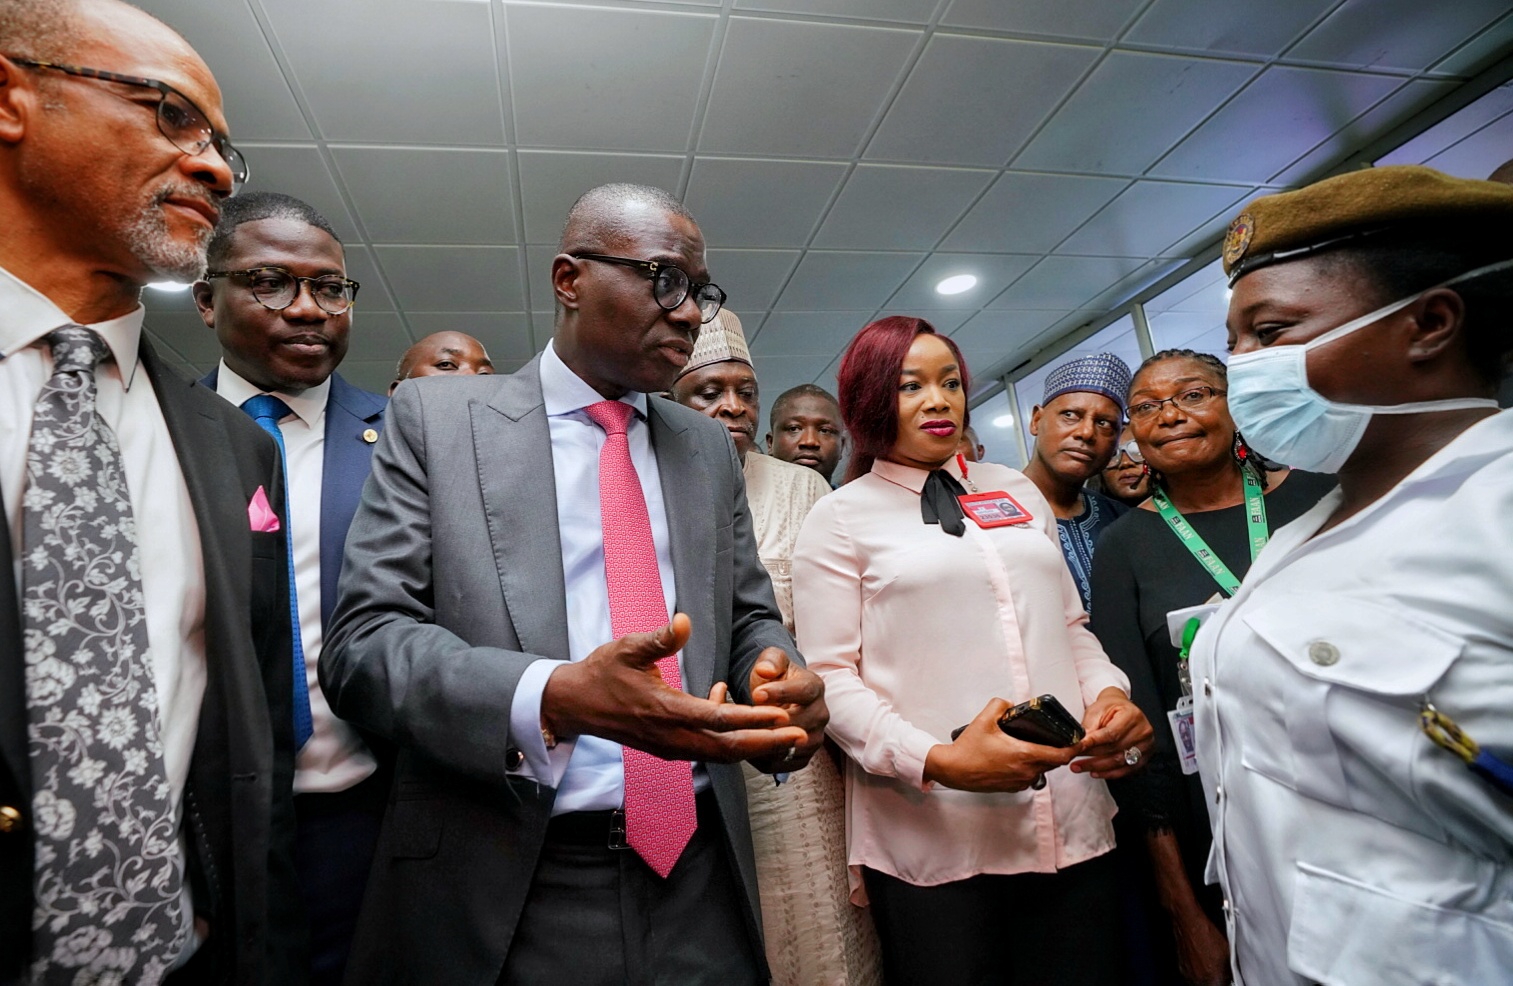 L-R: Lagos Commissioner for Health, Prof. Akin Abayomi; Head of Service, Mr. Hakeem Muri-Okunola; Governor Babajide Sanwo-Olu; Director of Airport Operations, FAAN; Capt. Murktar Muye; Station Manager, South Africa Embassy; Mrs. Joy Onyeadi and others, during an on-the-spot assessment of Coronavirus screening procedure at the Murtala Muhammed International Airport, Lagos, on Tuesday, March 17, 2020.